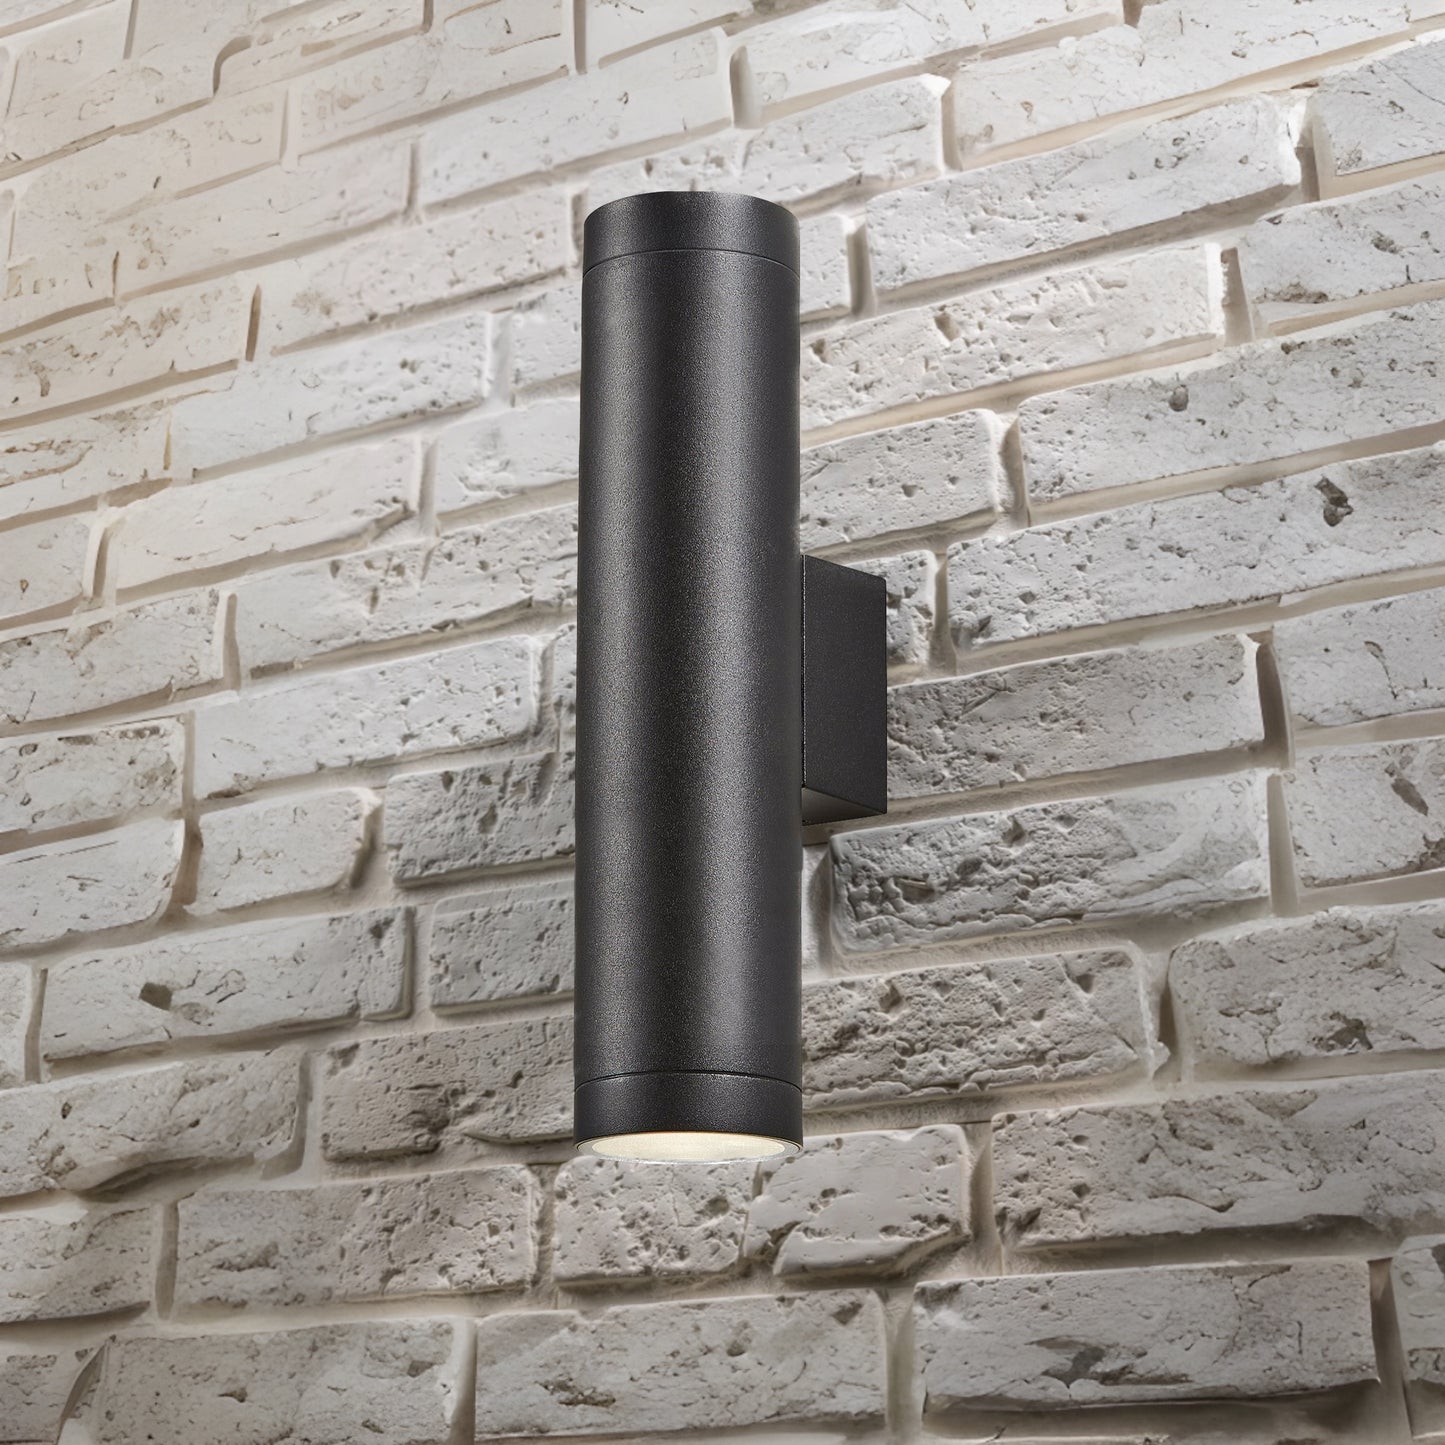 Our Lucas black extra long outdoor wall mounted up and down cylinder outdoor light would look perfect in a modern or more traditional home design. Outside wall lights can provide atmospheric light in your garden, at the front door or on the terrace as well as a great security solution. It is designed for durability and longevity with its robust material producing a fully weatherproof and water resistant light fitting.